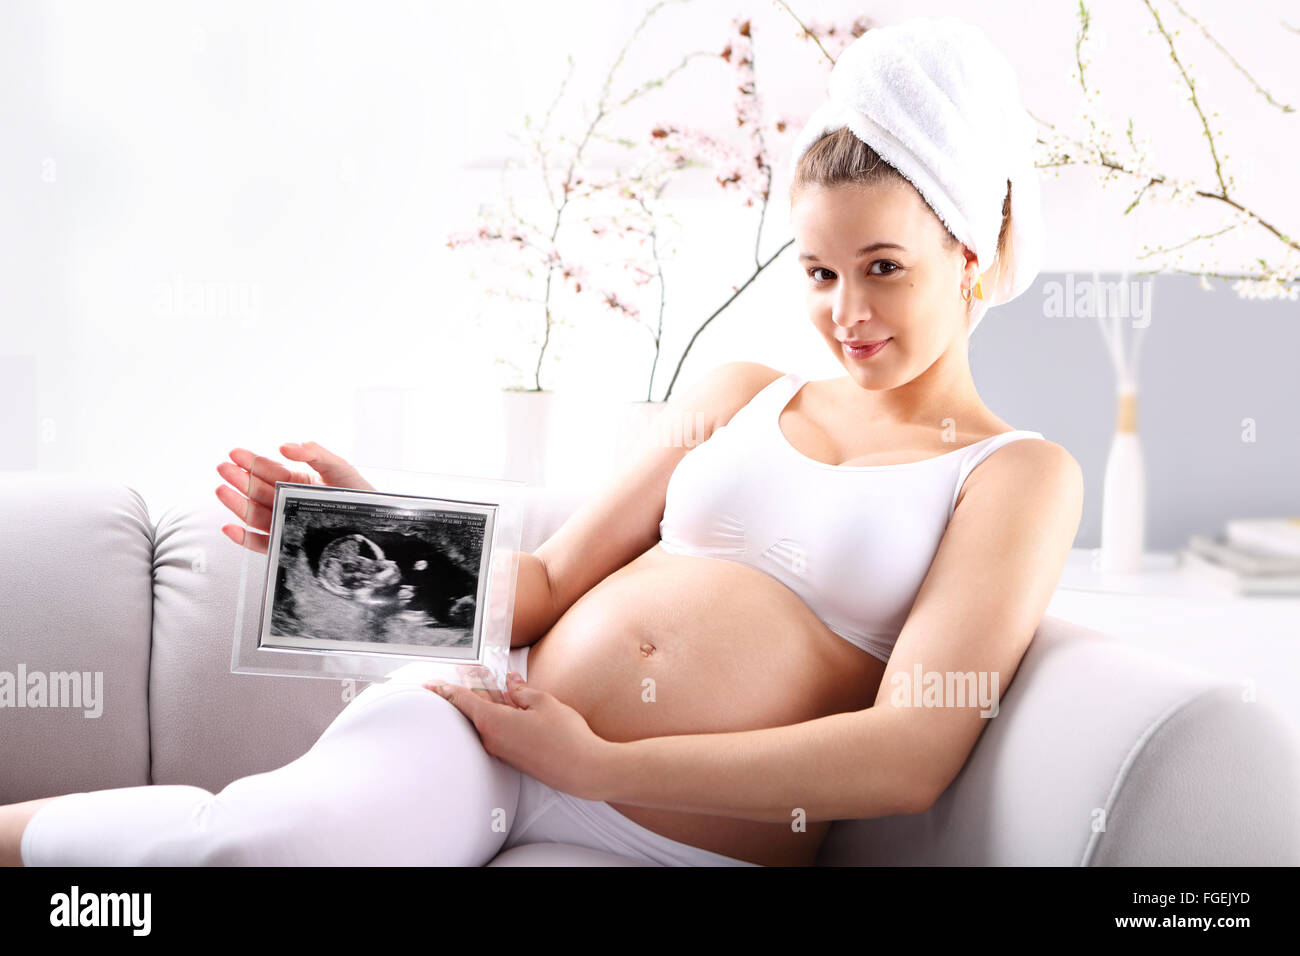 Pregnant woman showing ultrasound baby . Young expectant mother ultrasound shows the baby sitting on the sofa Stock Photo